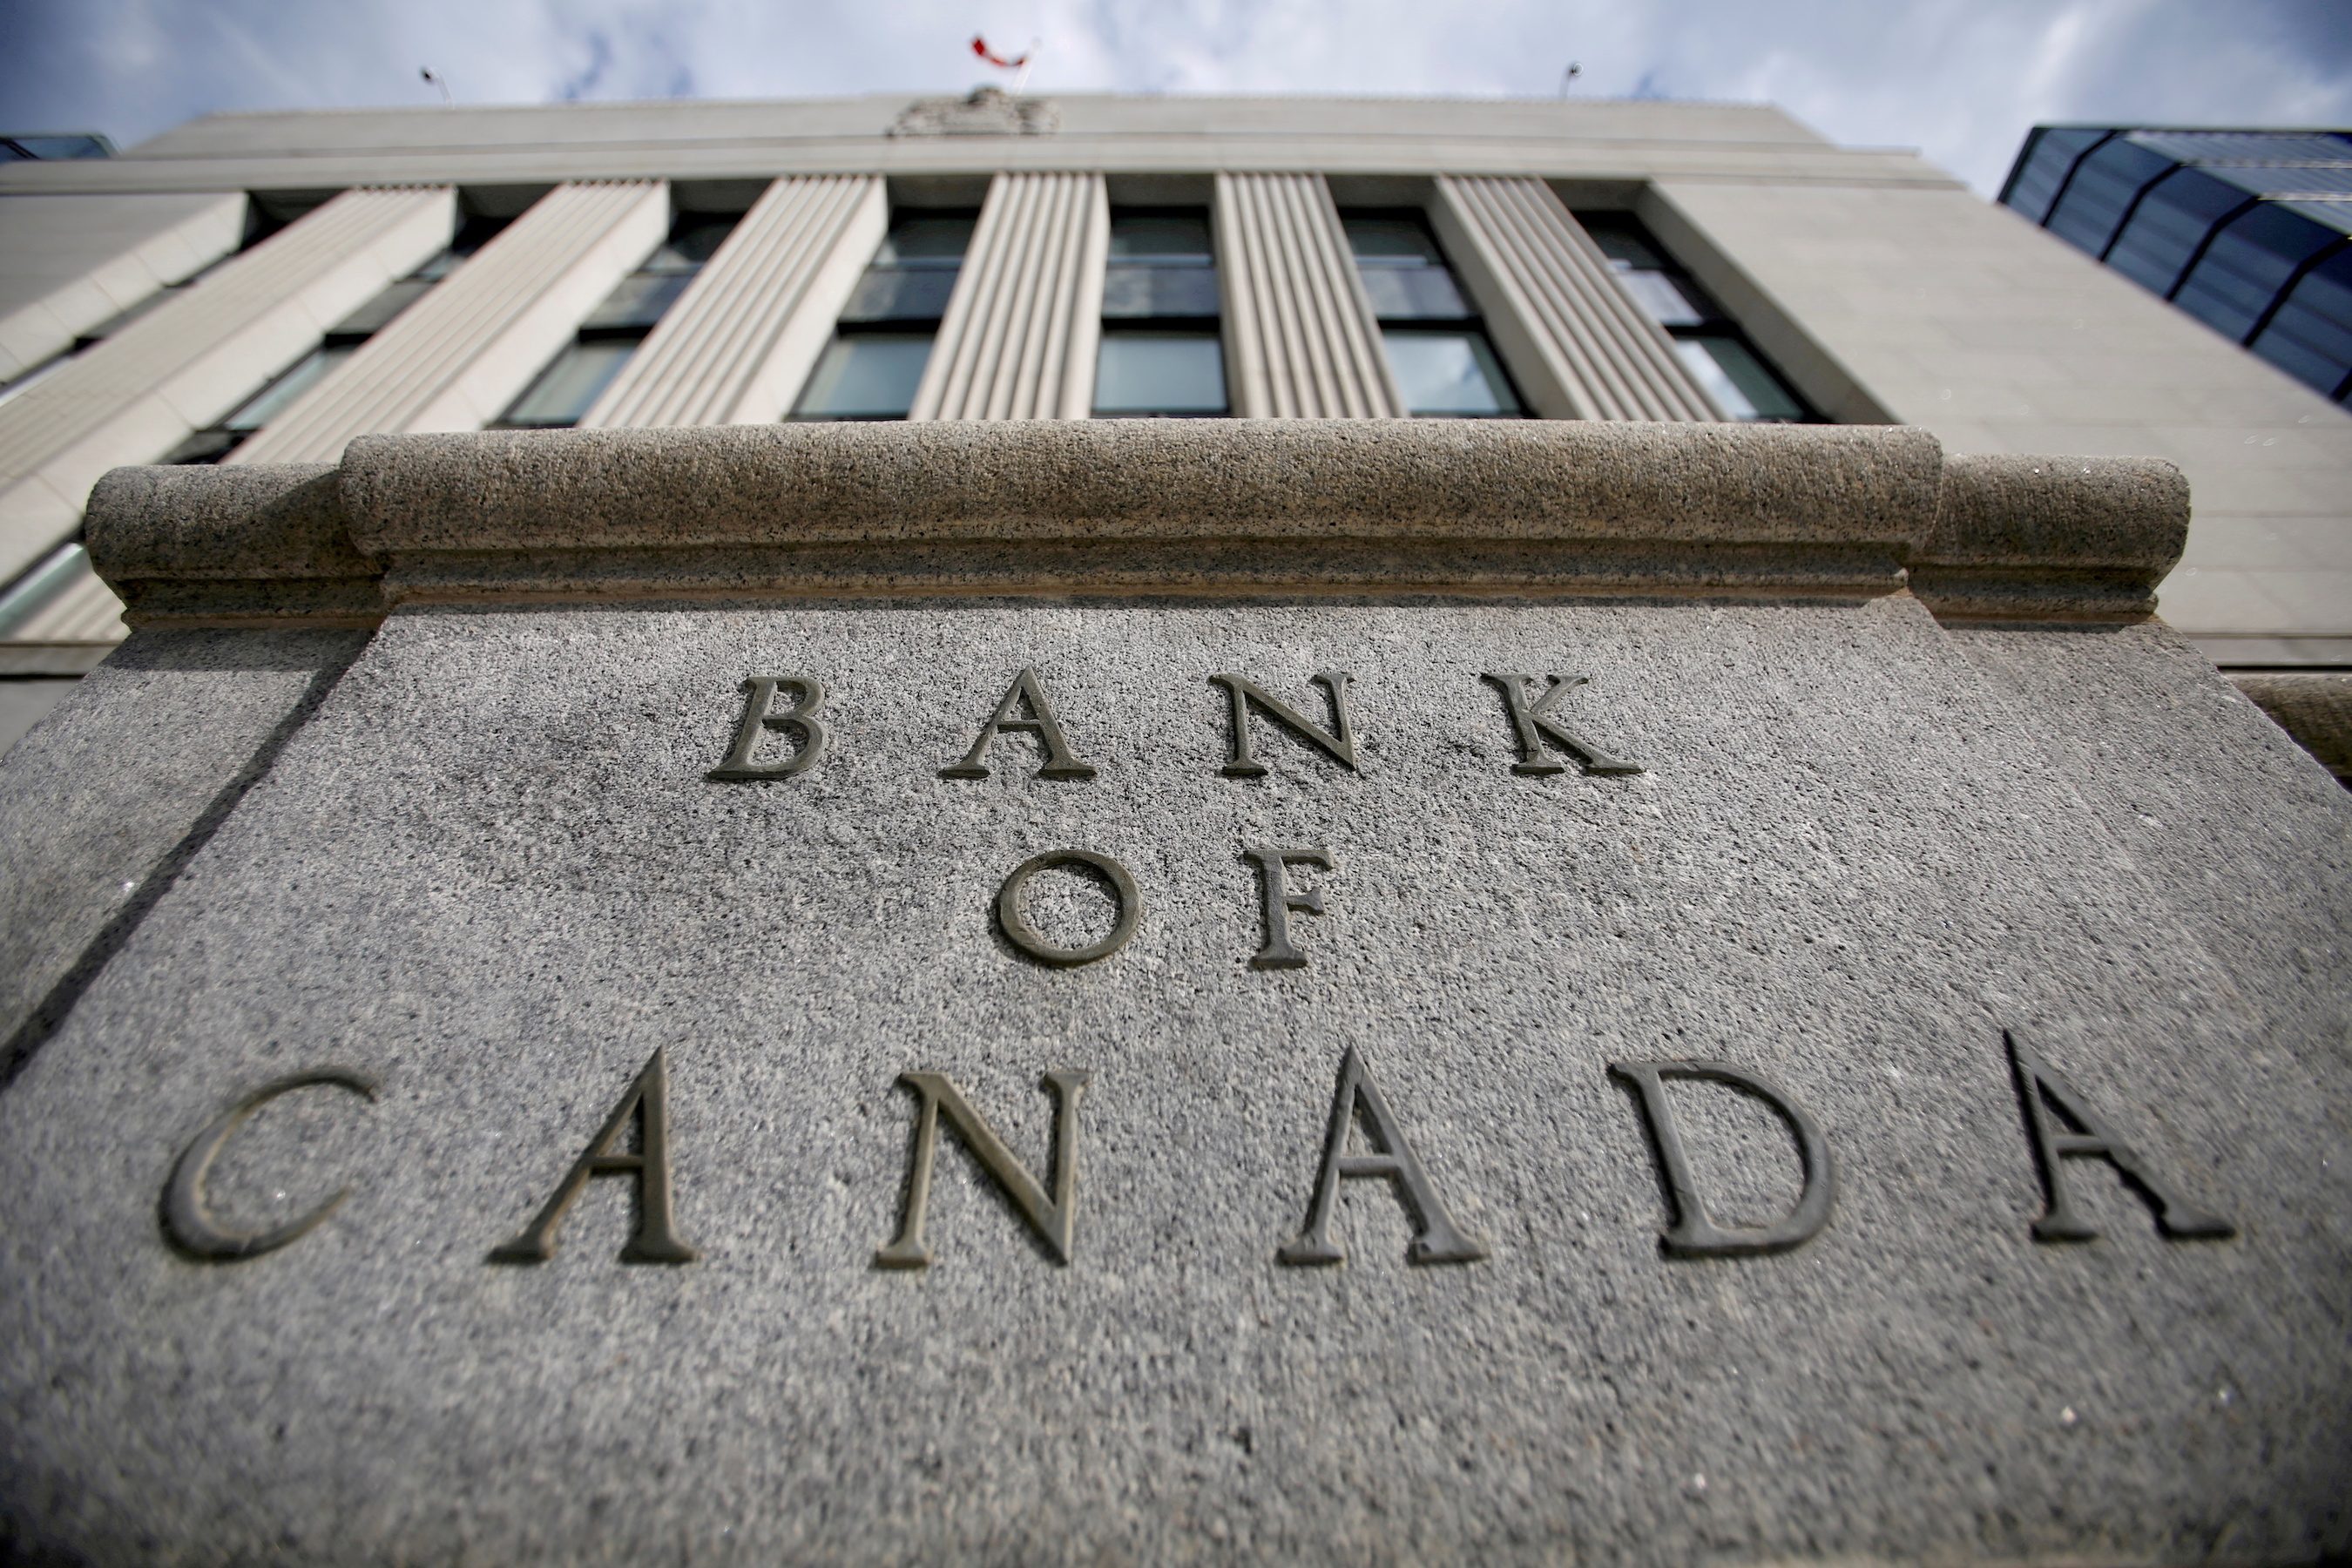 In Canada, hot inflation opens rare attack on central bank